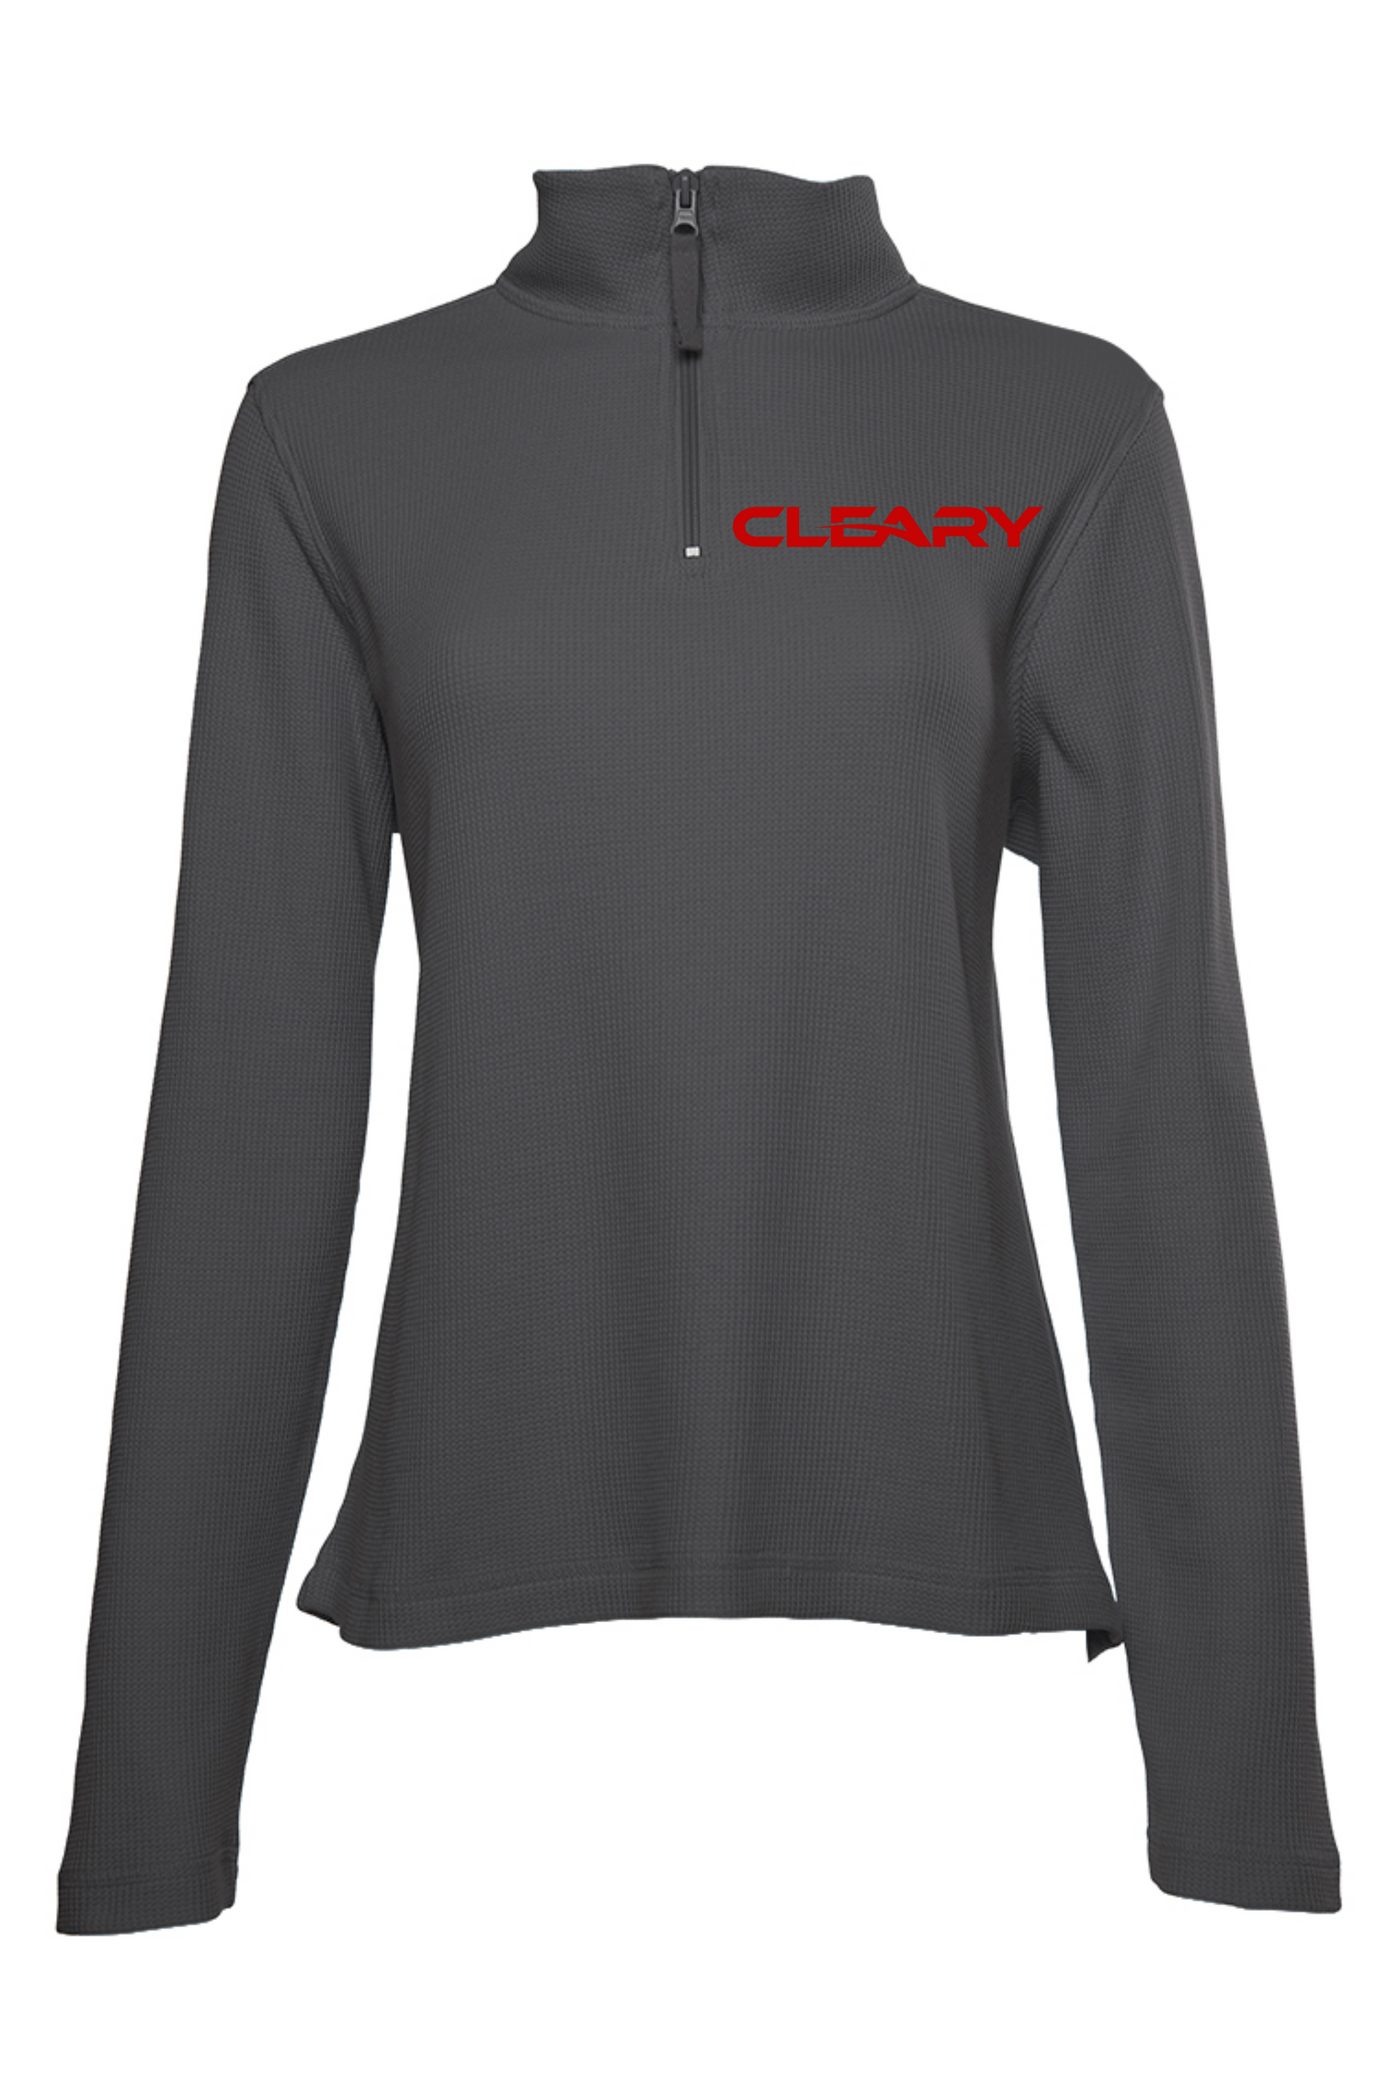 Cleary's Women's Waffle Quarter Zip Pullover Charcoal Grey